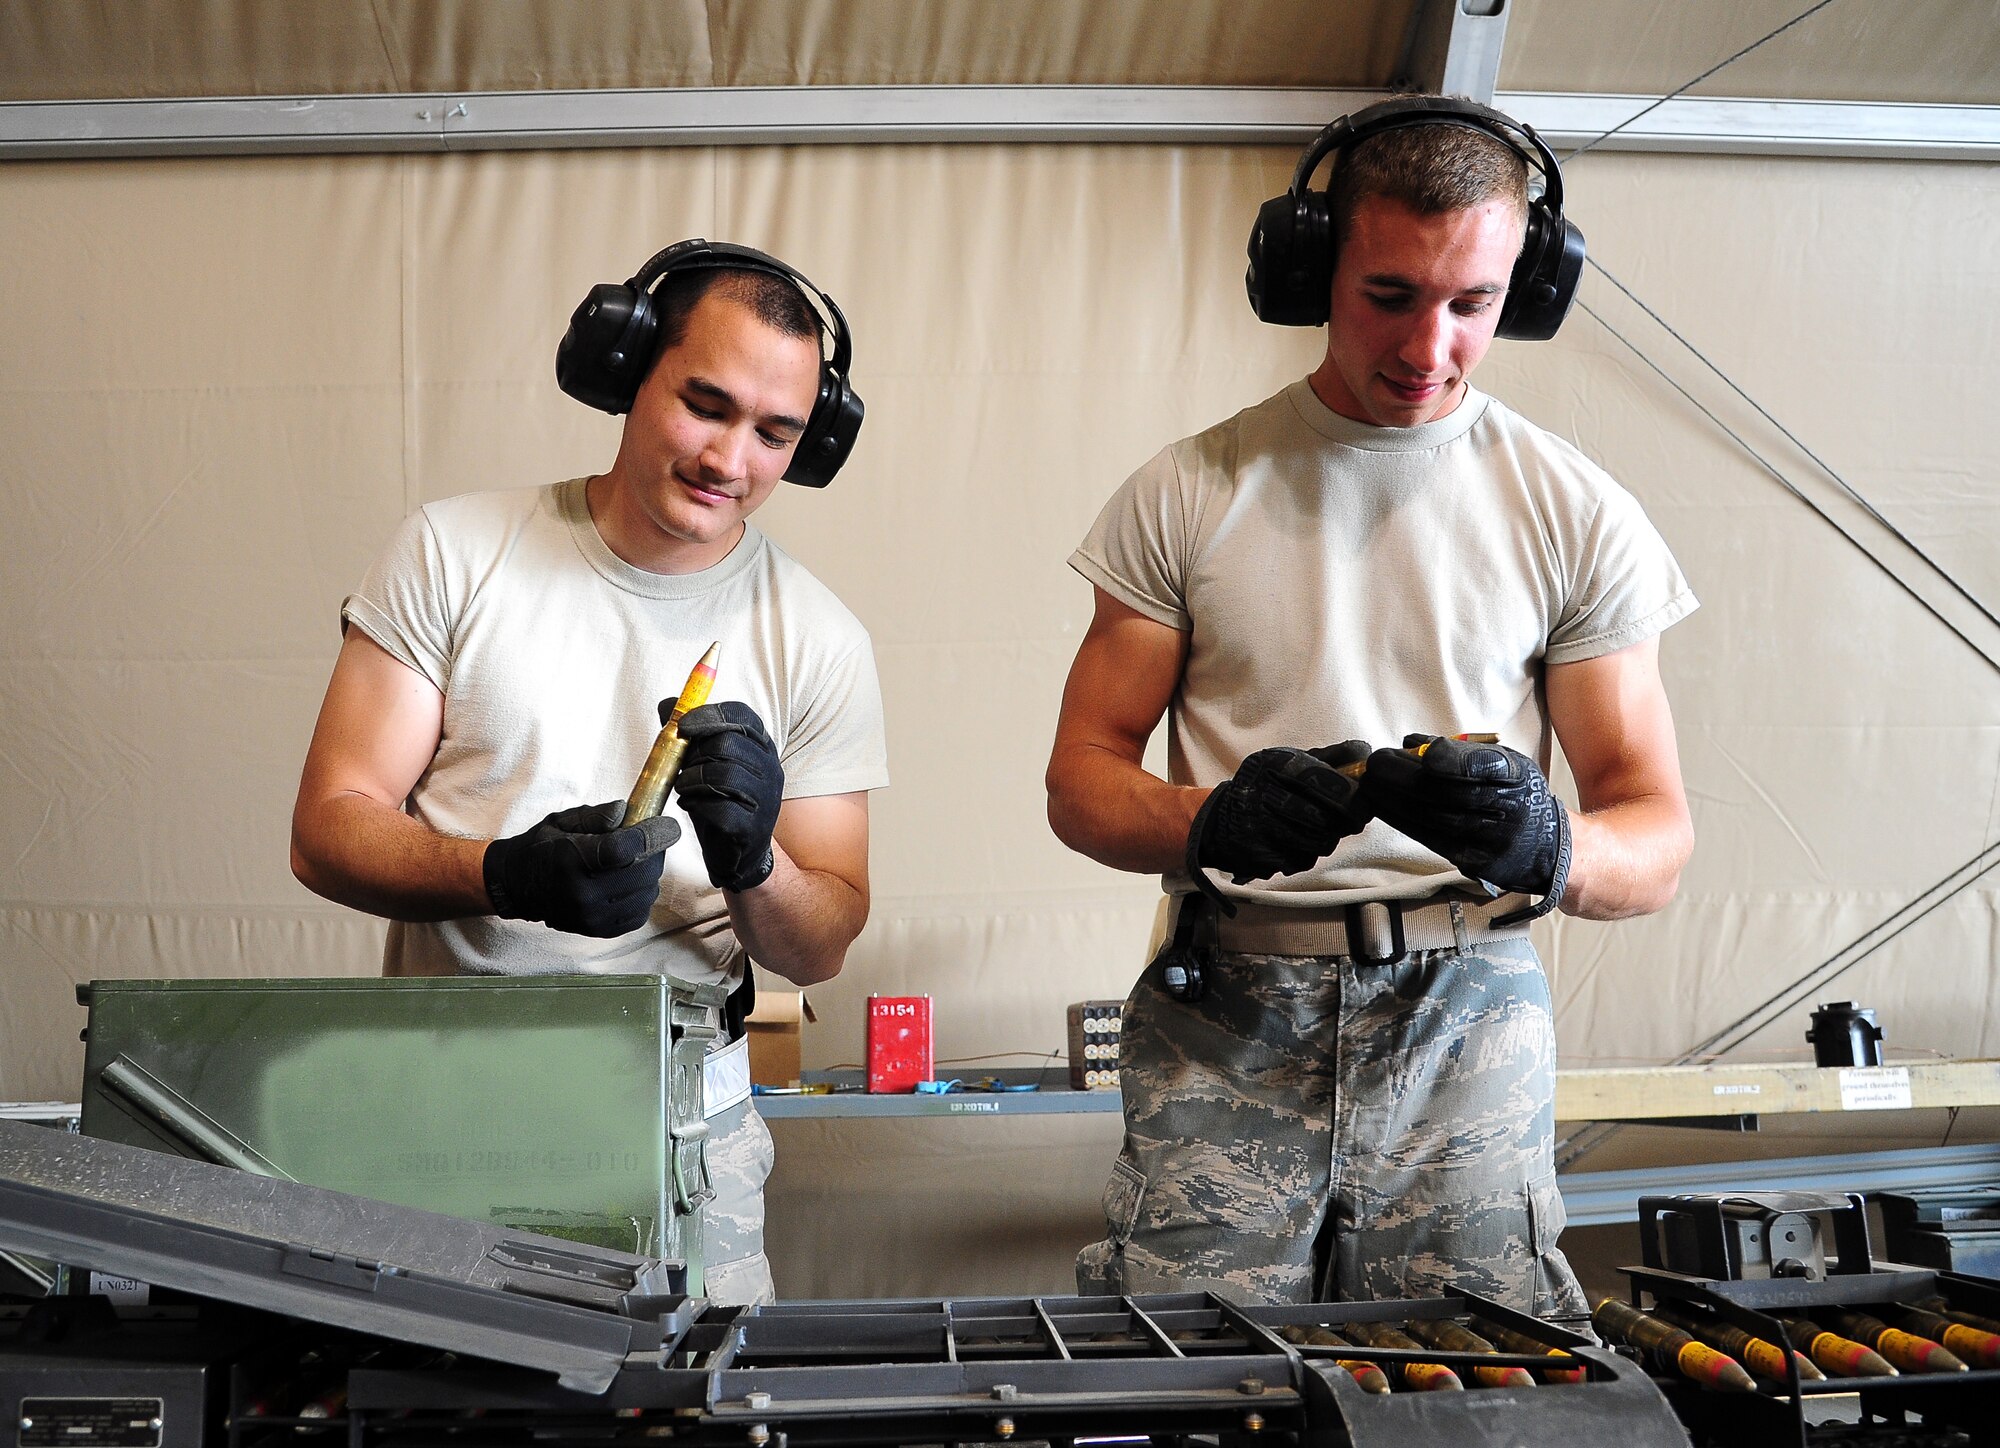 U.S. Air Force Airman 1st Class David Duston, left, and Airman 1st Class Jeremy Gomez, both munitions crew members, inspect 20 mm rounds during Exercise Eager Lion June 4, 2014, at an air base in northern Jordan. Both Airmen are from the 35th Maintenance Squadron at Misawa Air Base, Japan, and are providing munitions support during the exercise for F-16 Fighting Falcons also from Misawa. (U.S. Air Force photo by Staff Sgt. Brigitte N. Brantley/Released)